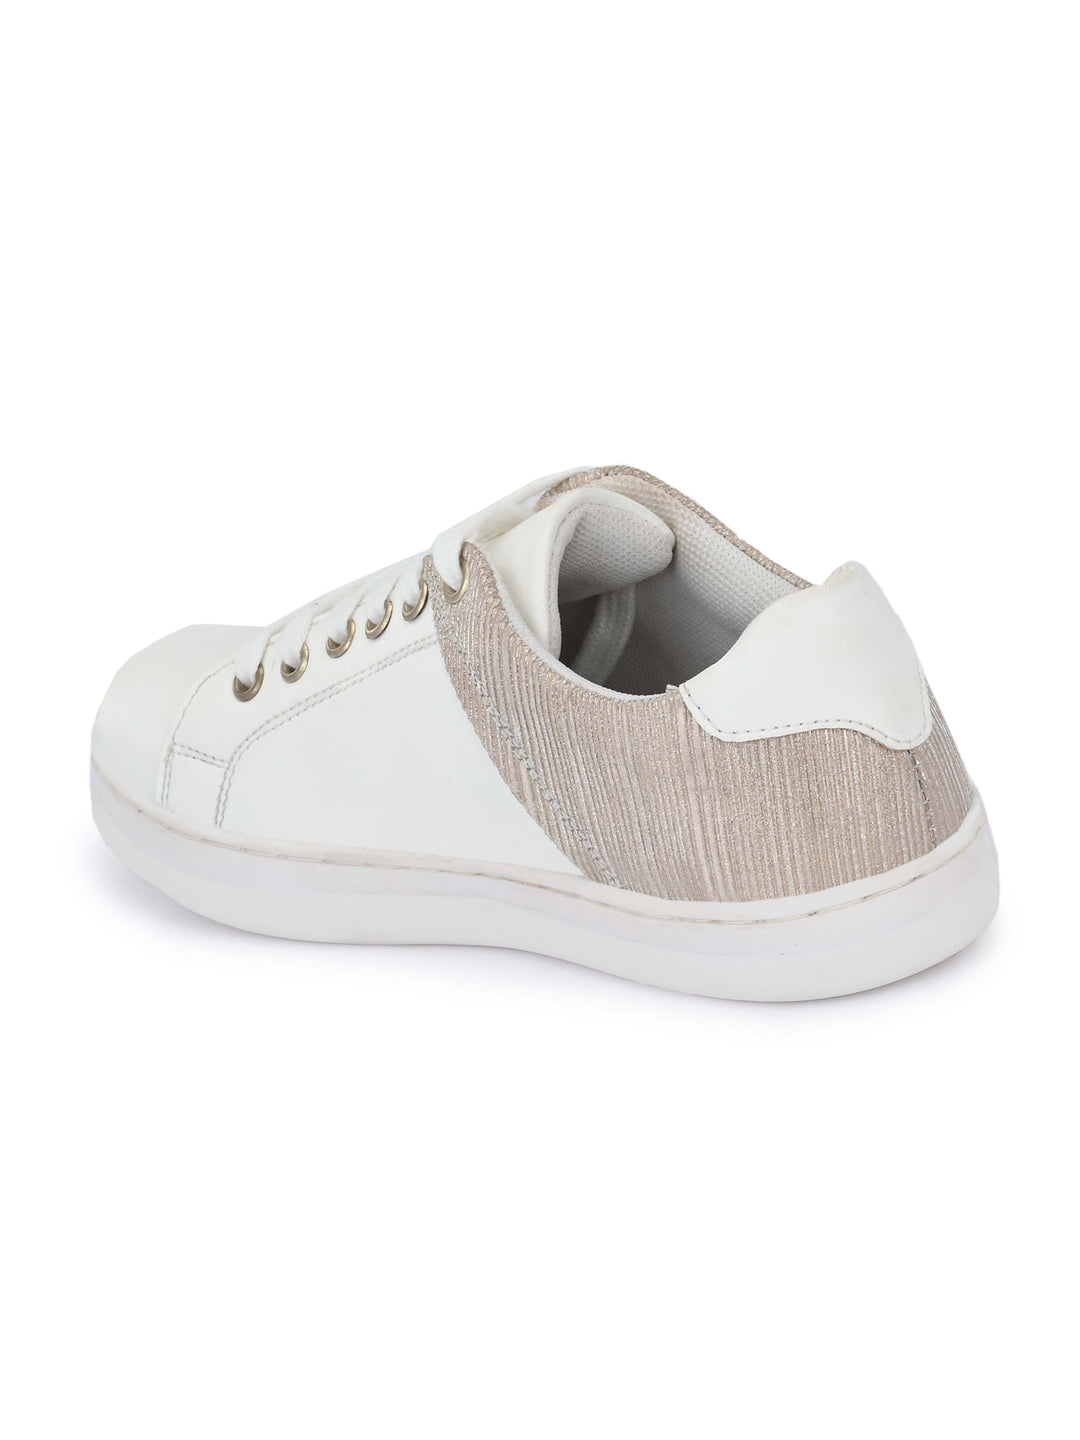 Camila White Gold Dual Size Technology Sneakers for Kids